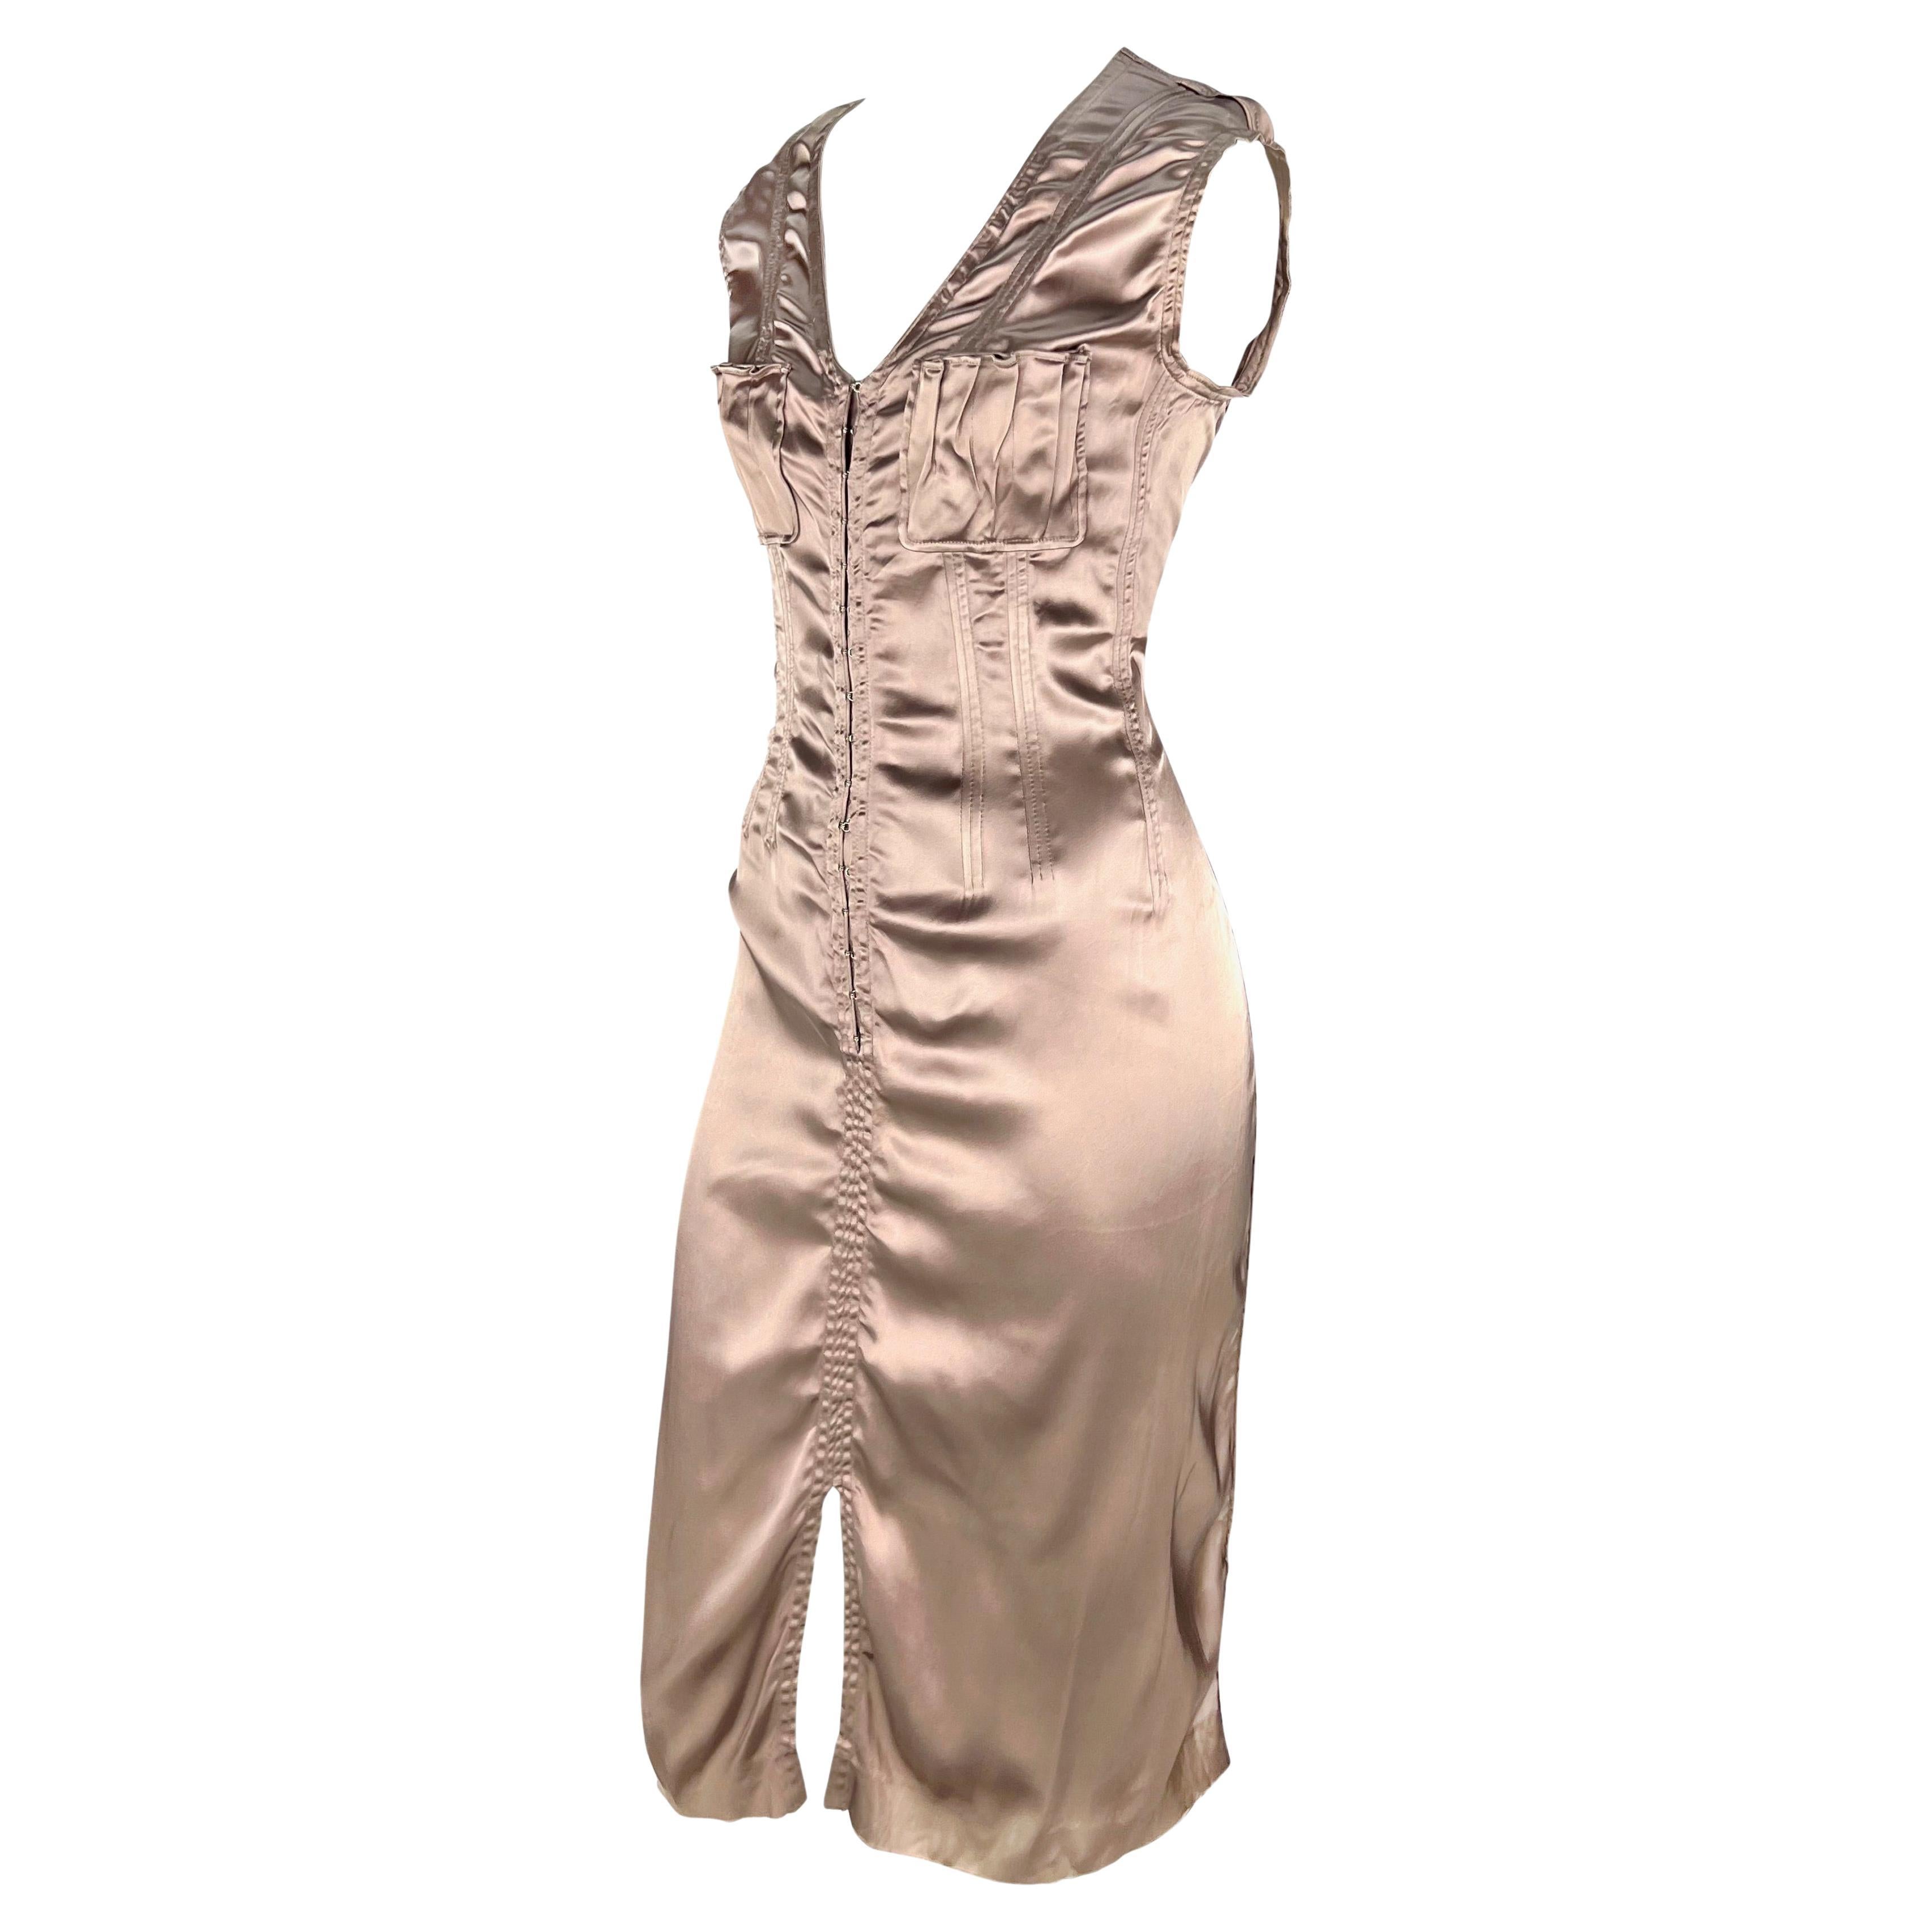 2002 Yves Saint Laurent by Tom Ford Sleeveless Champagne Satin Panel Midi Dress In Excellent Condition For Sale In West Hollywood, CA